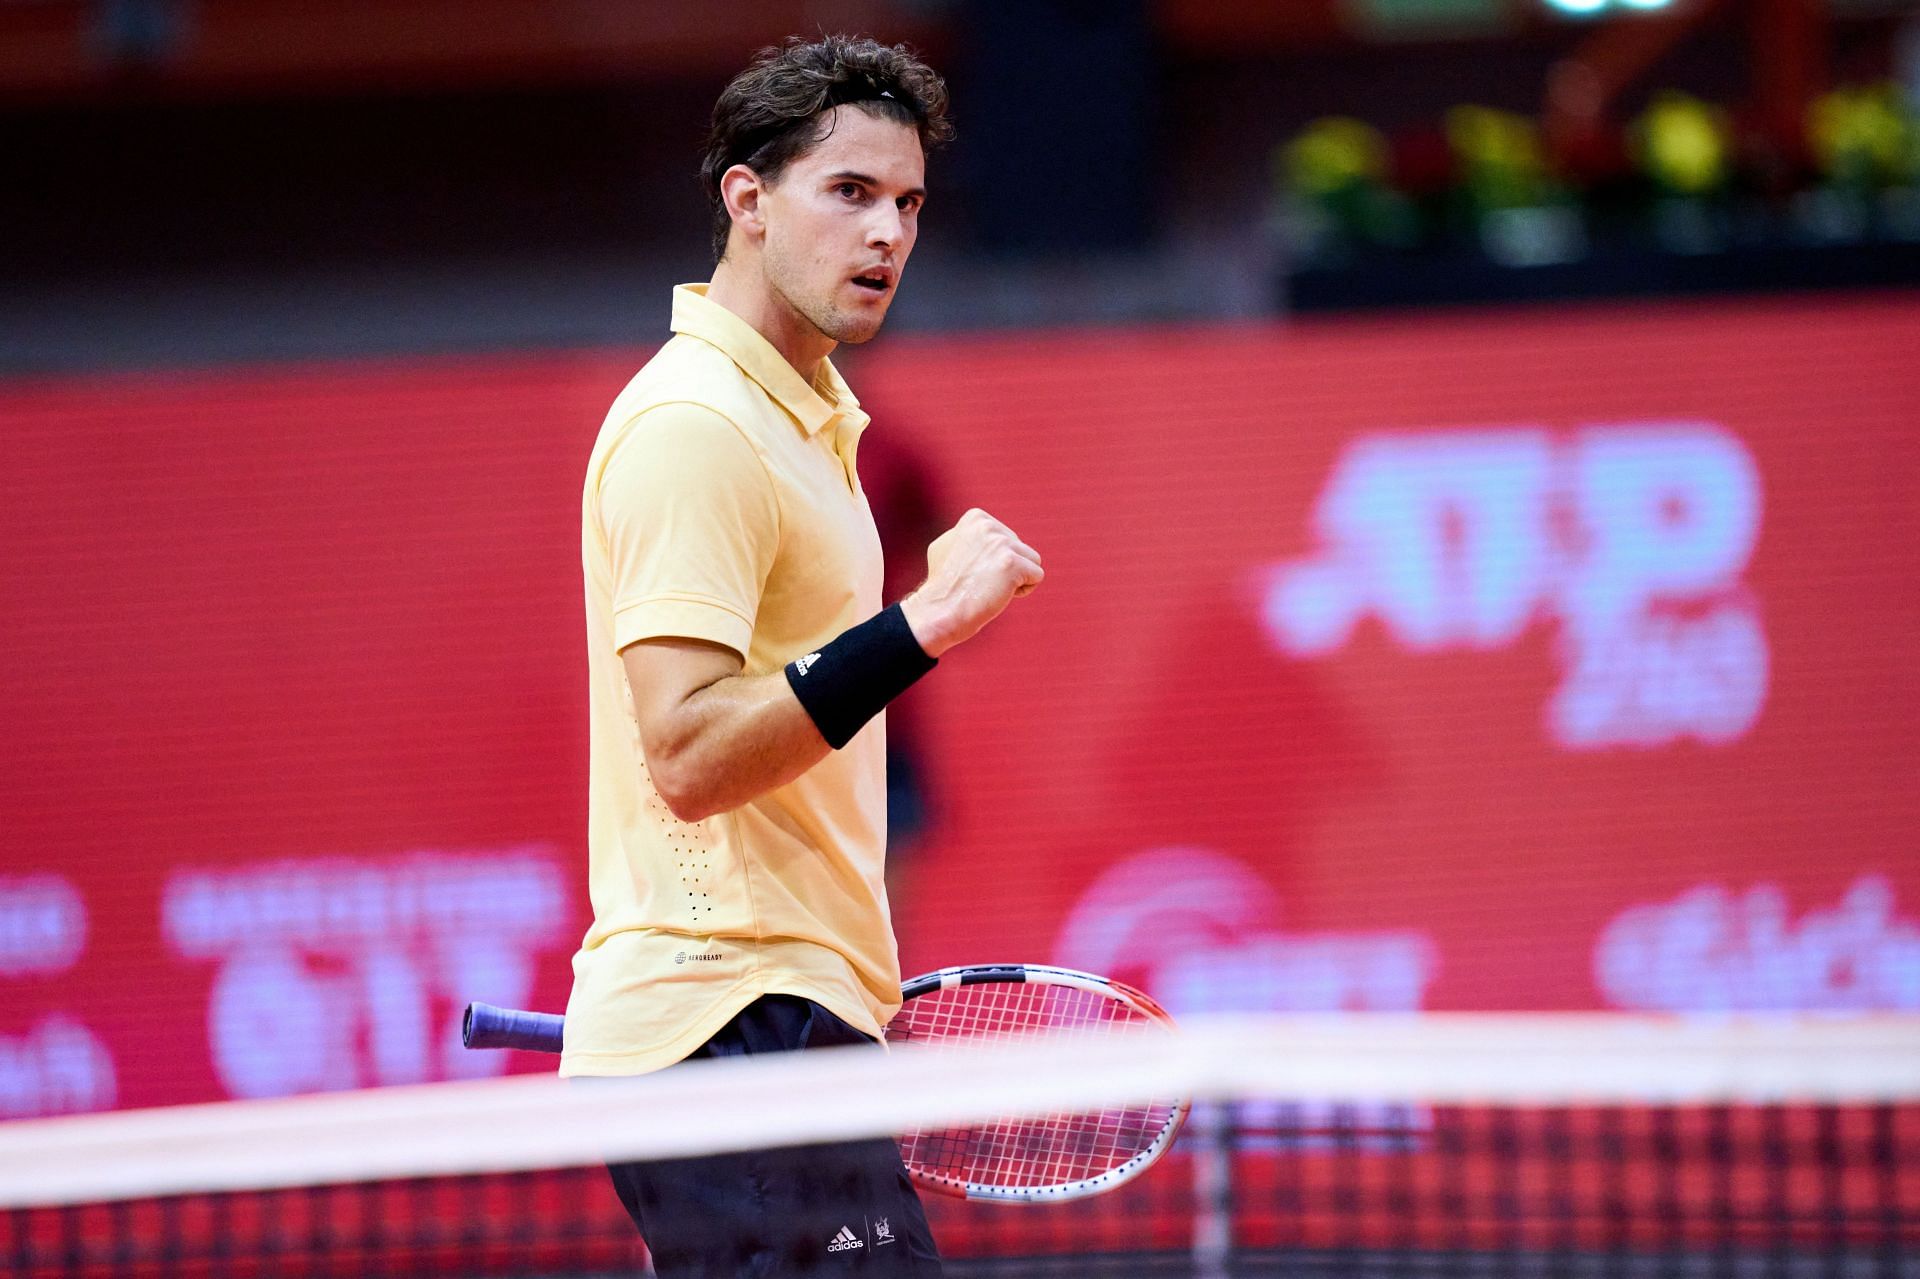 Thiem in action at the Gijon Open